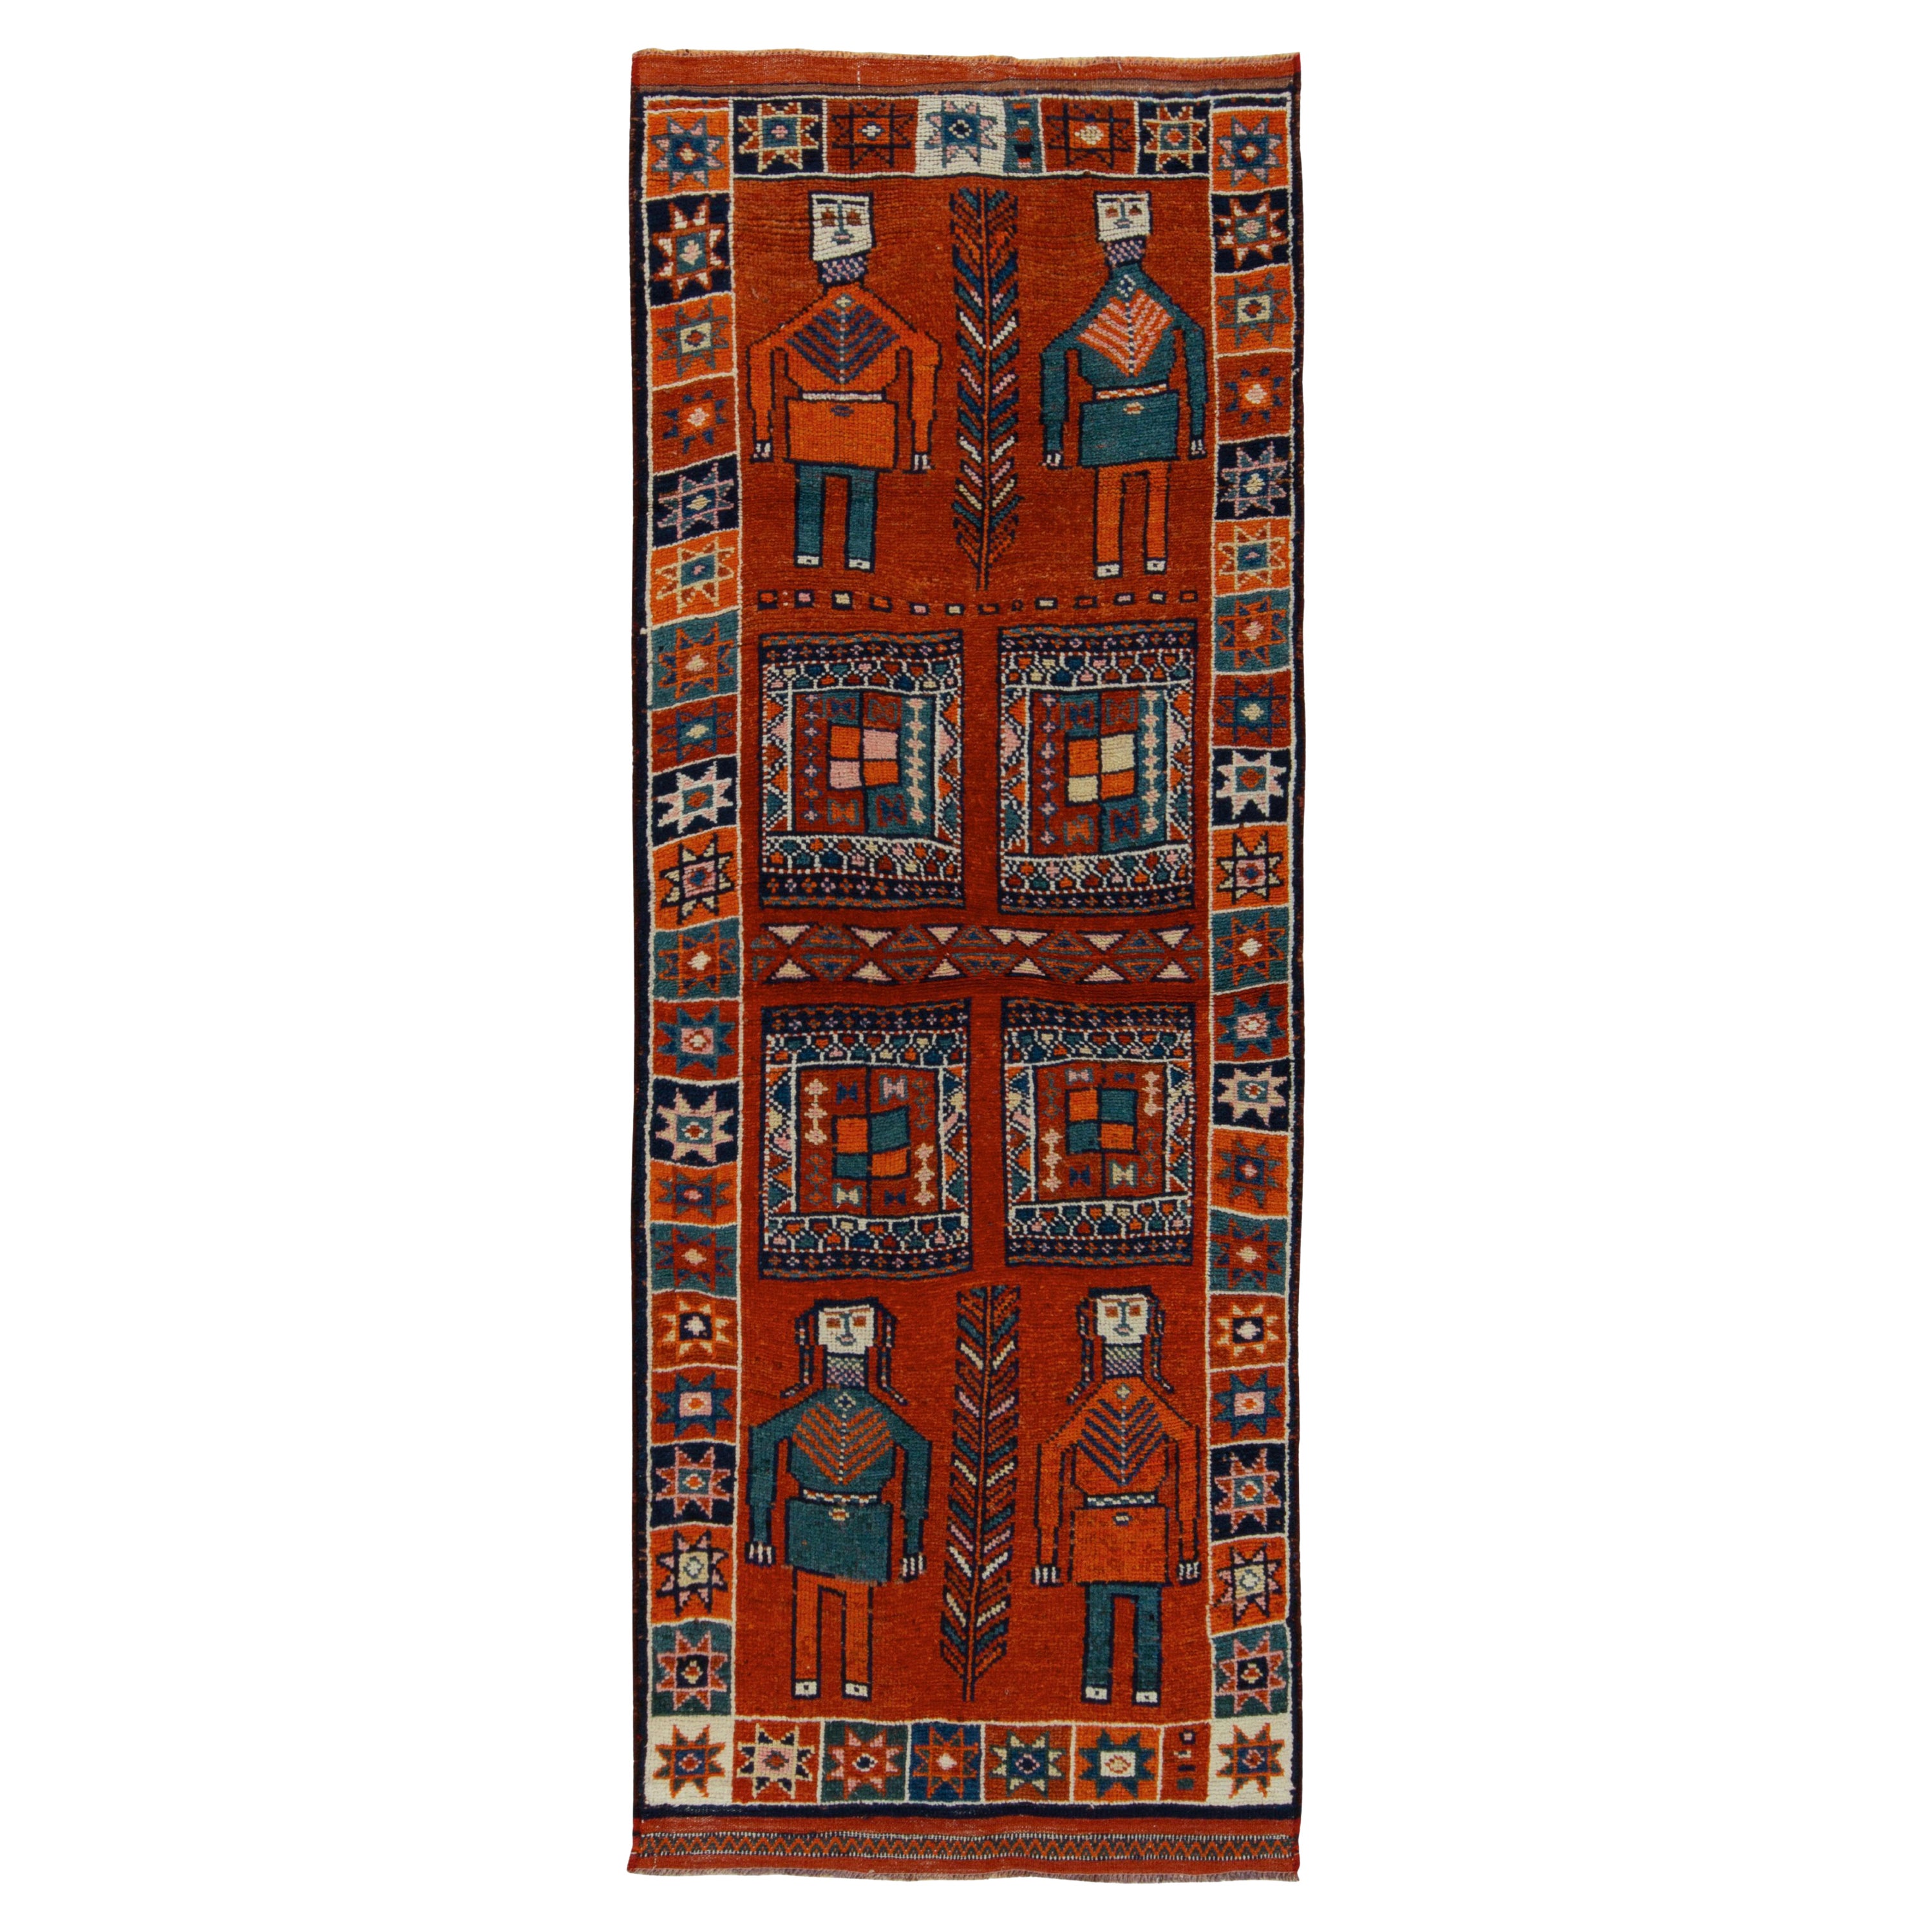 1950s Vintage Tribal Rug in Orange, Red and Blue Pictorial Patterns For Sale